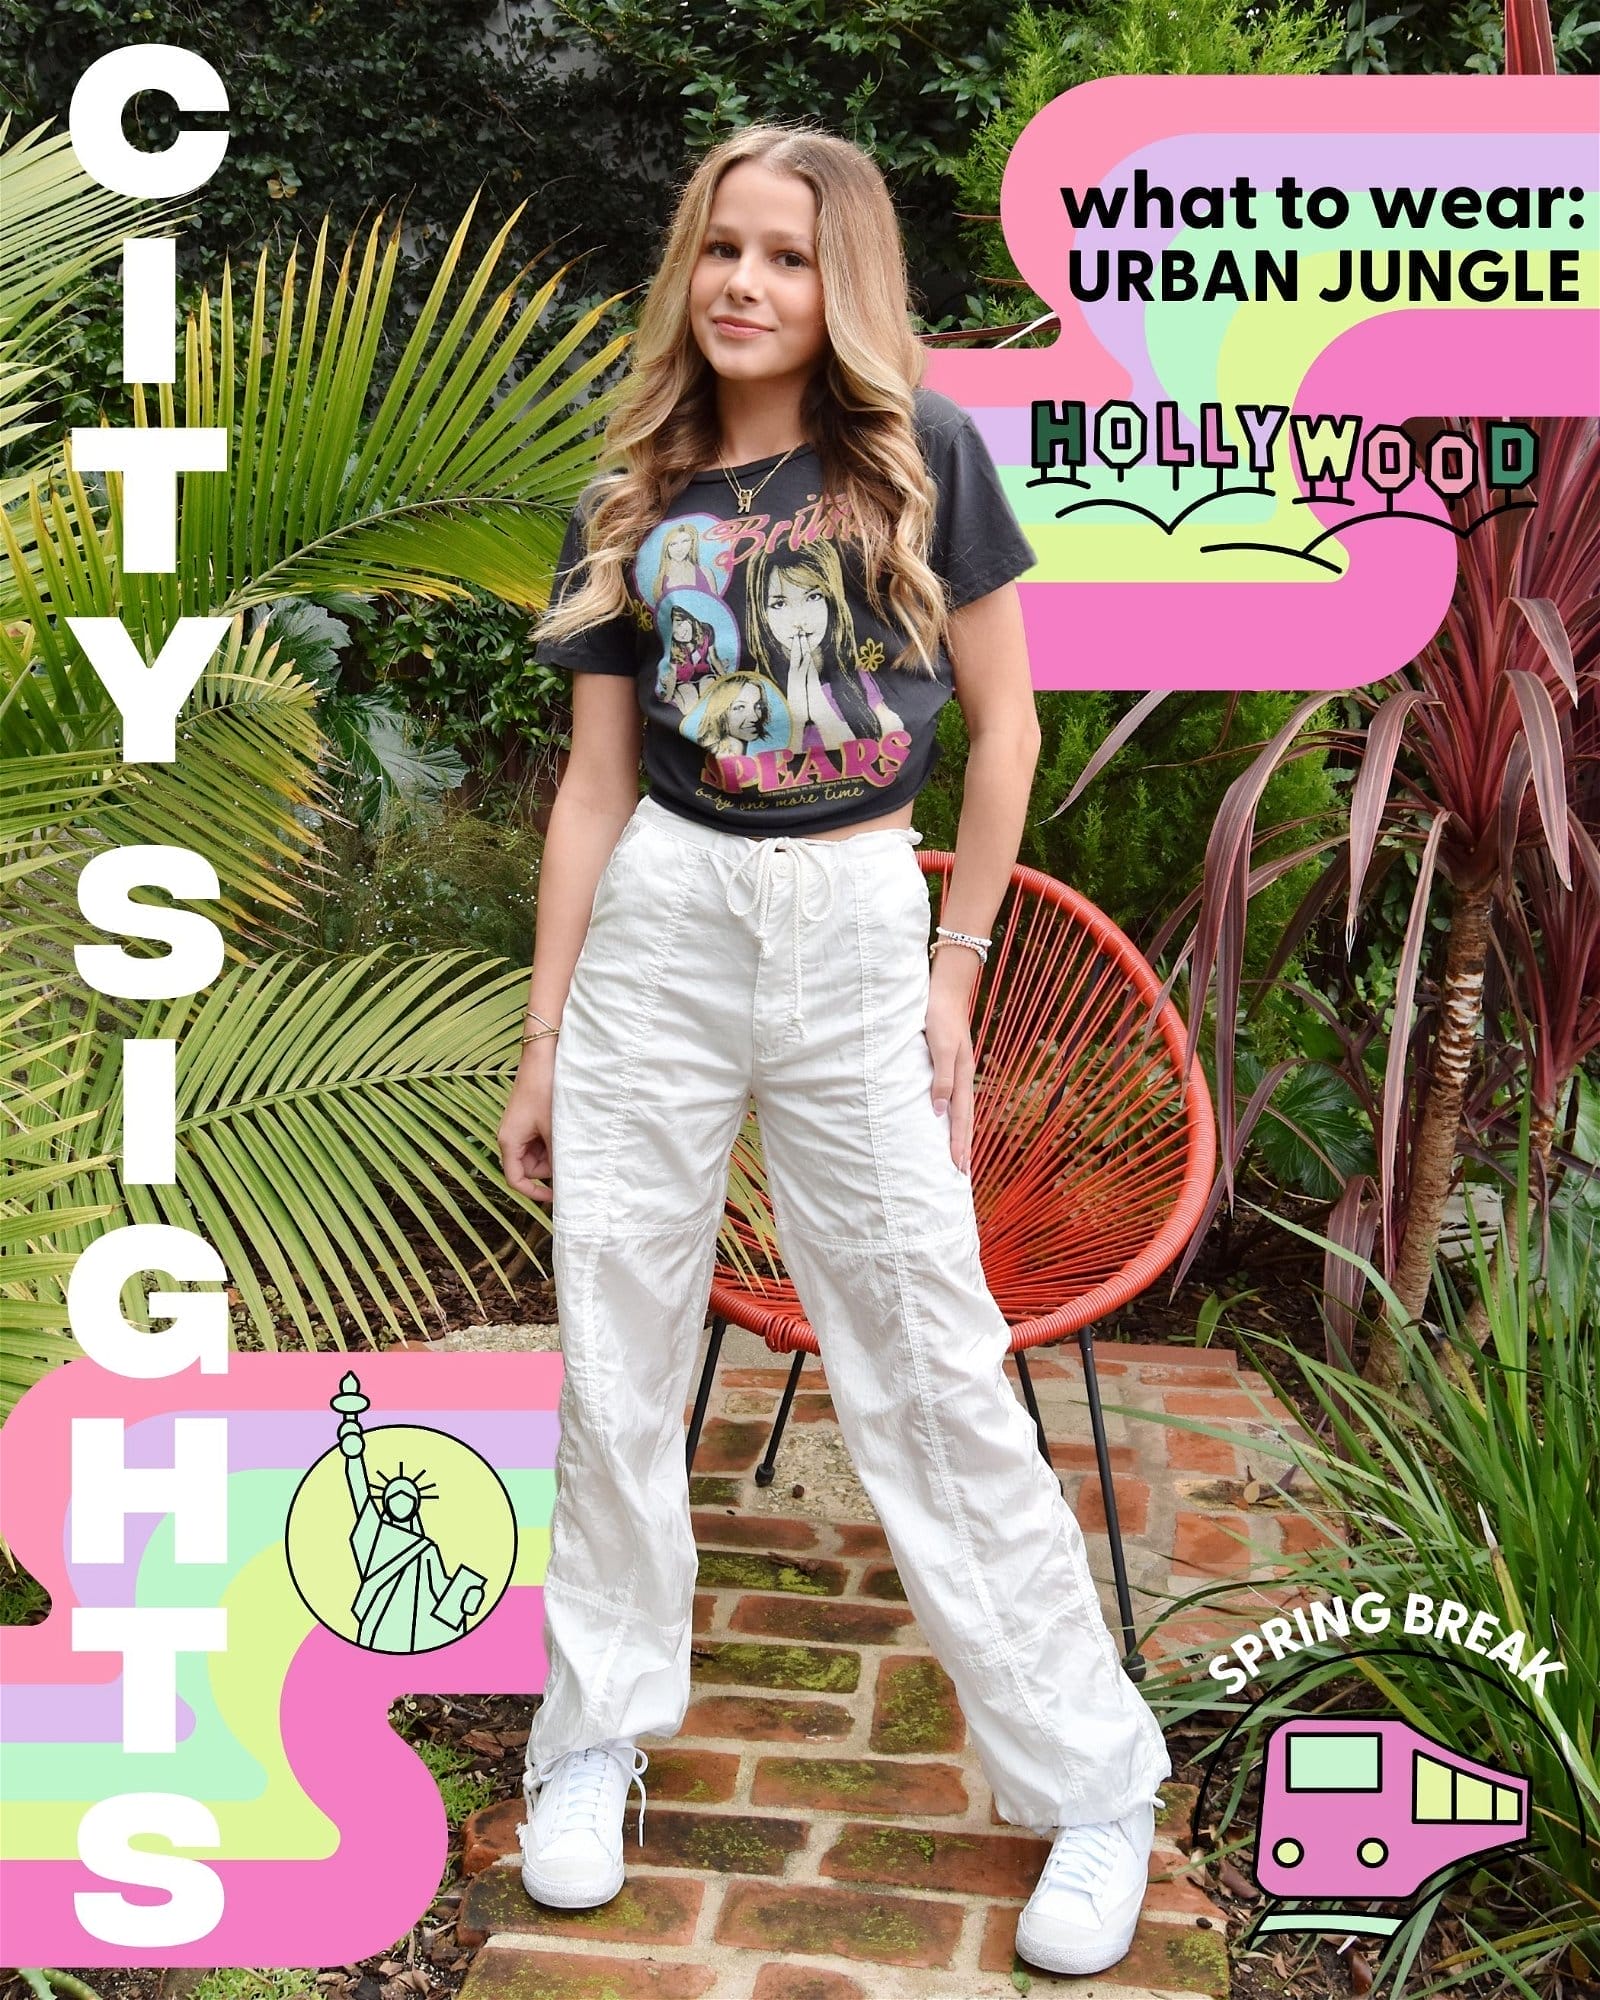 City Sights - What to Wear: Urban Jungle